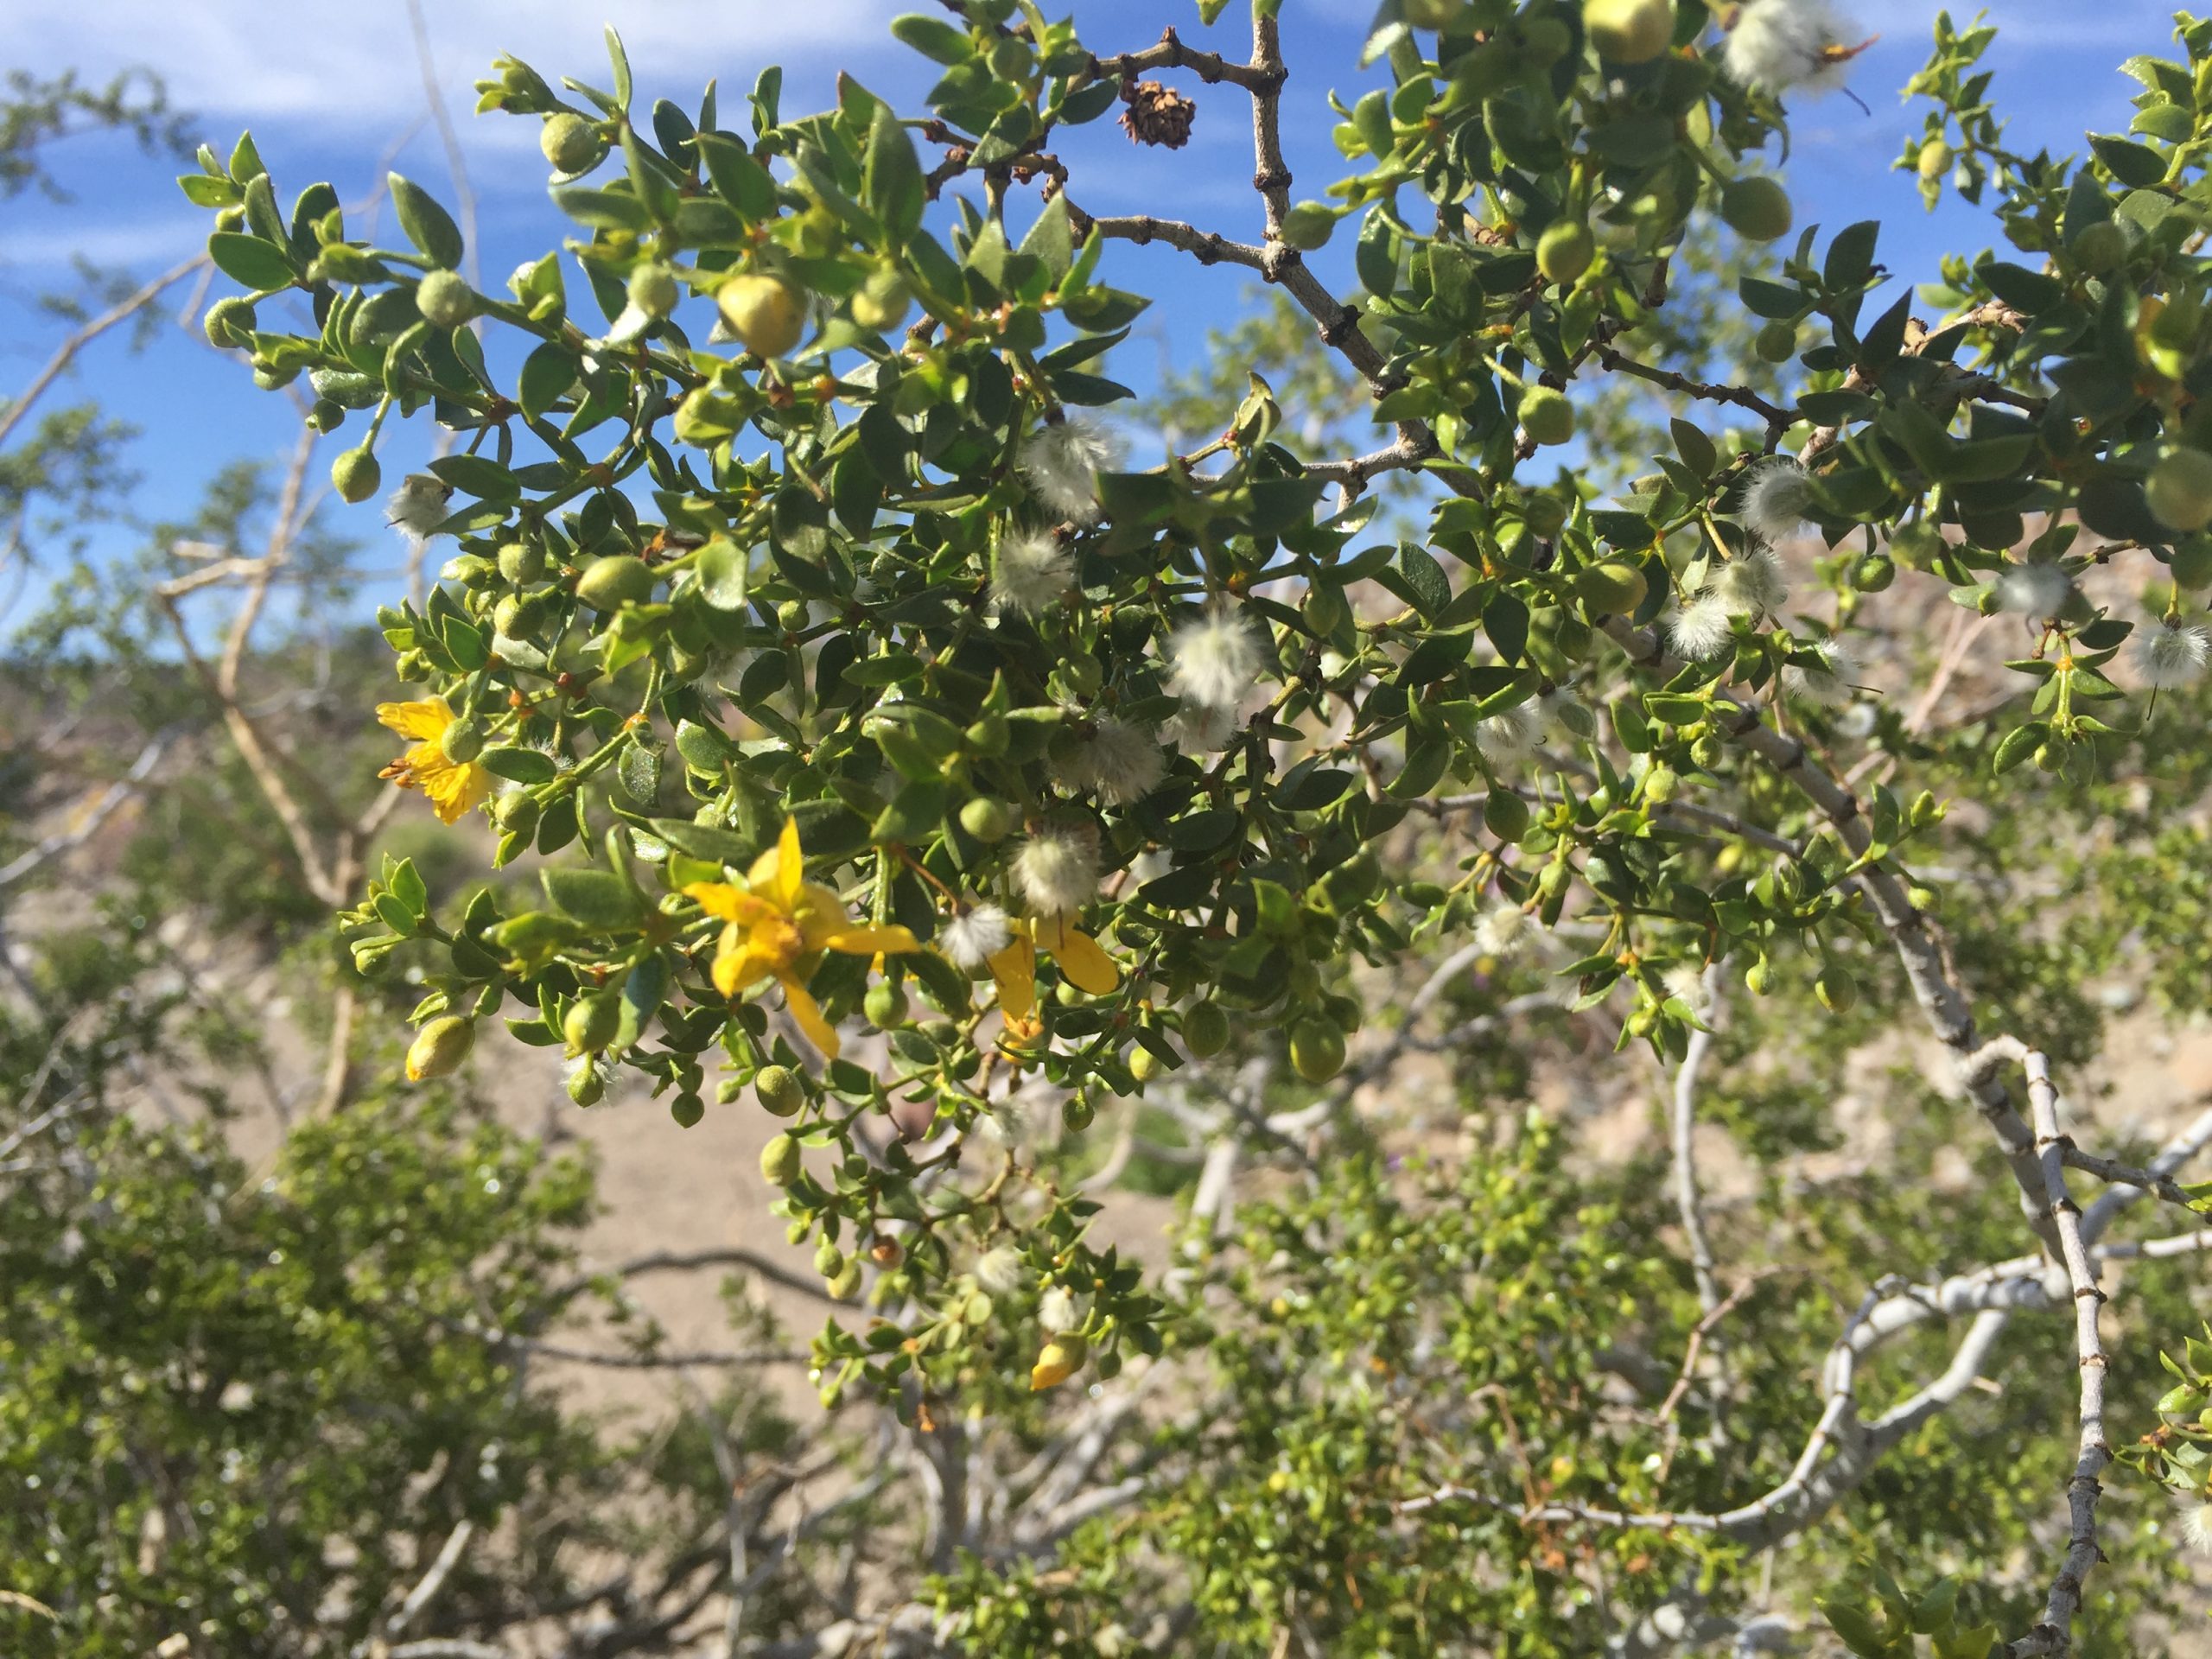 A close-up of the yellow flowers and fluffy seeds of creosote